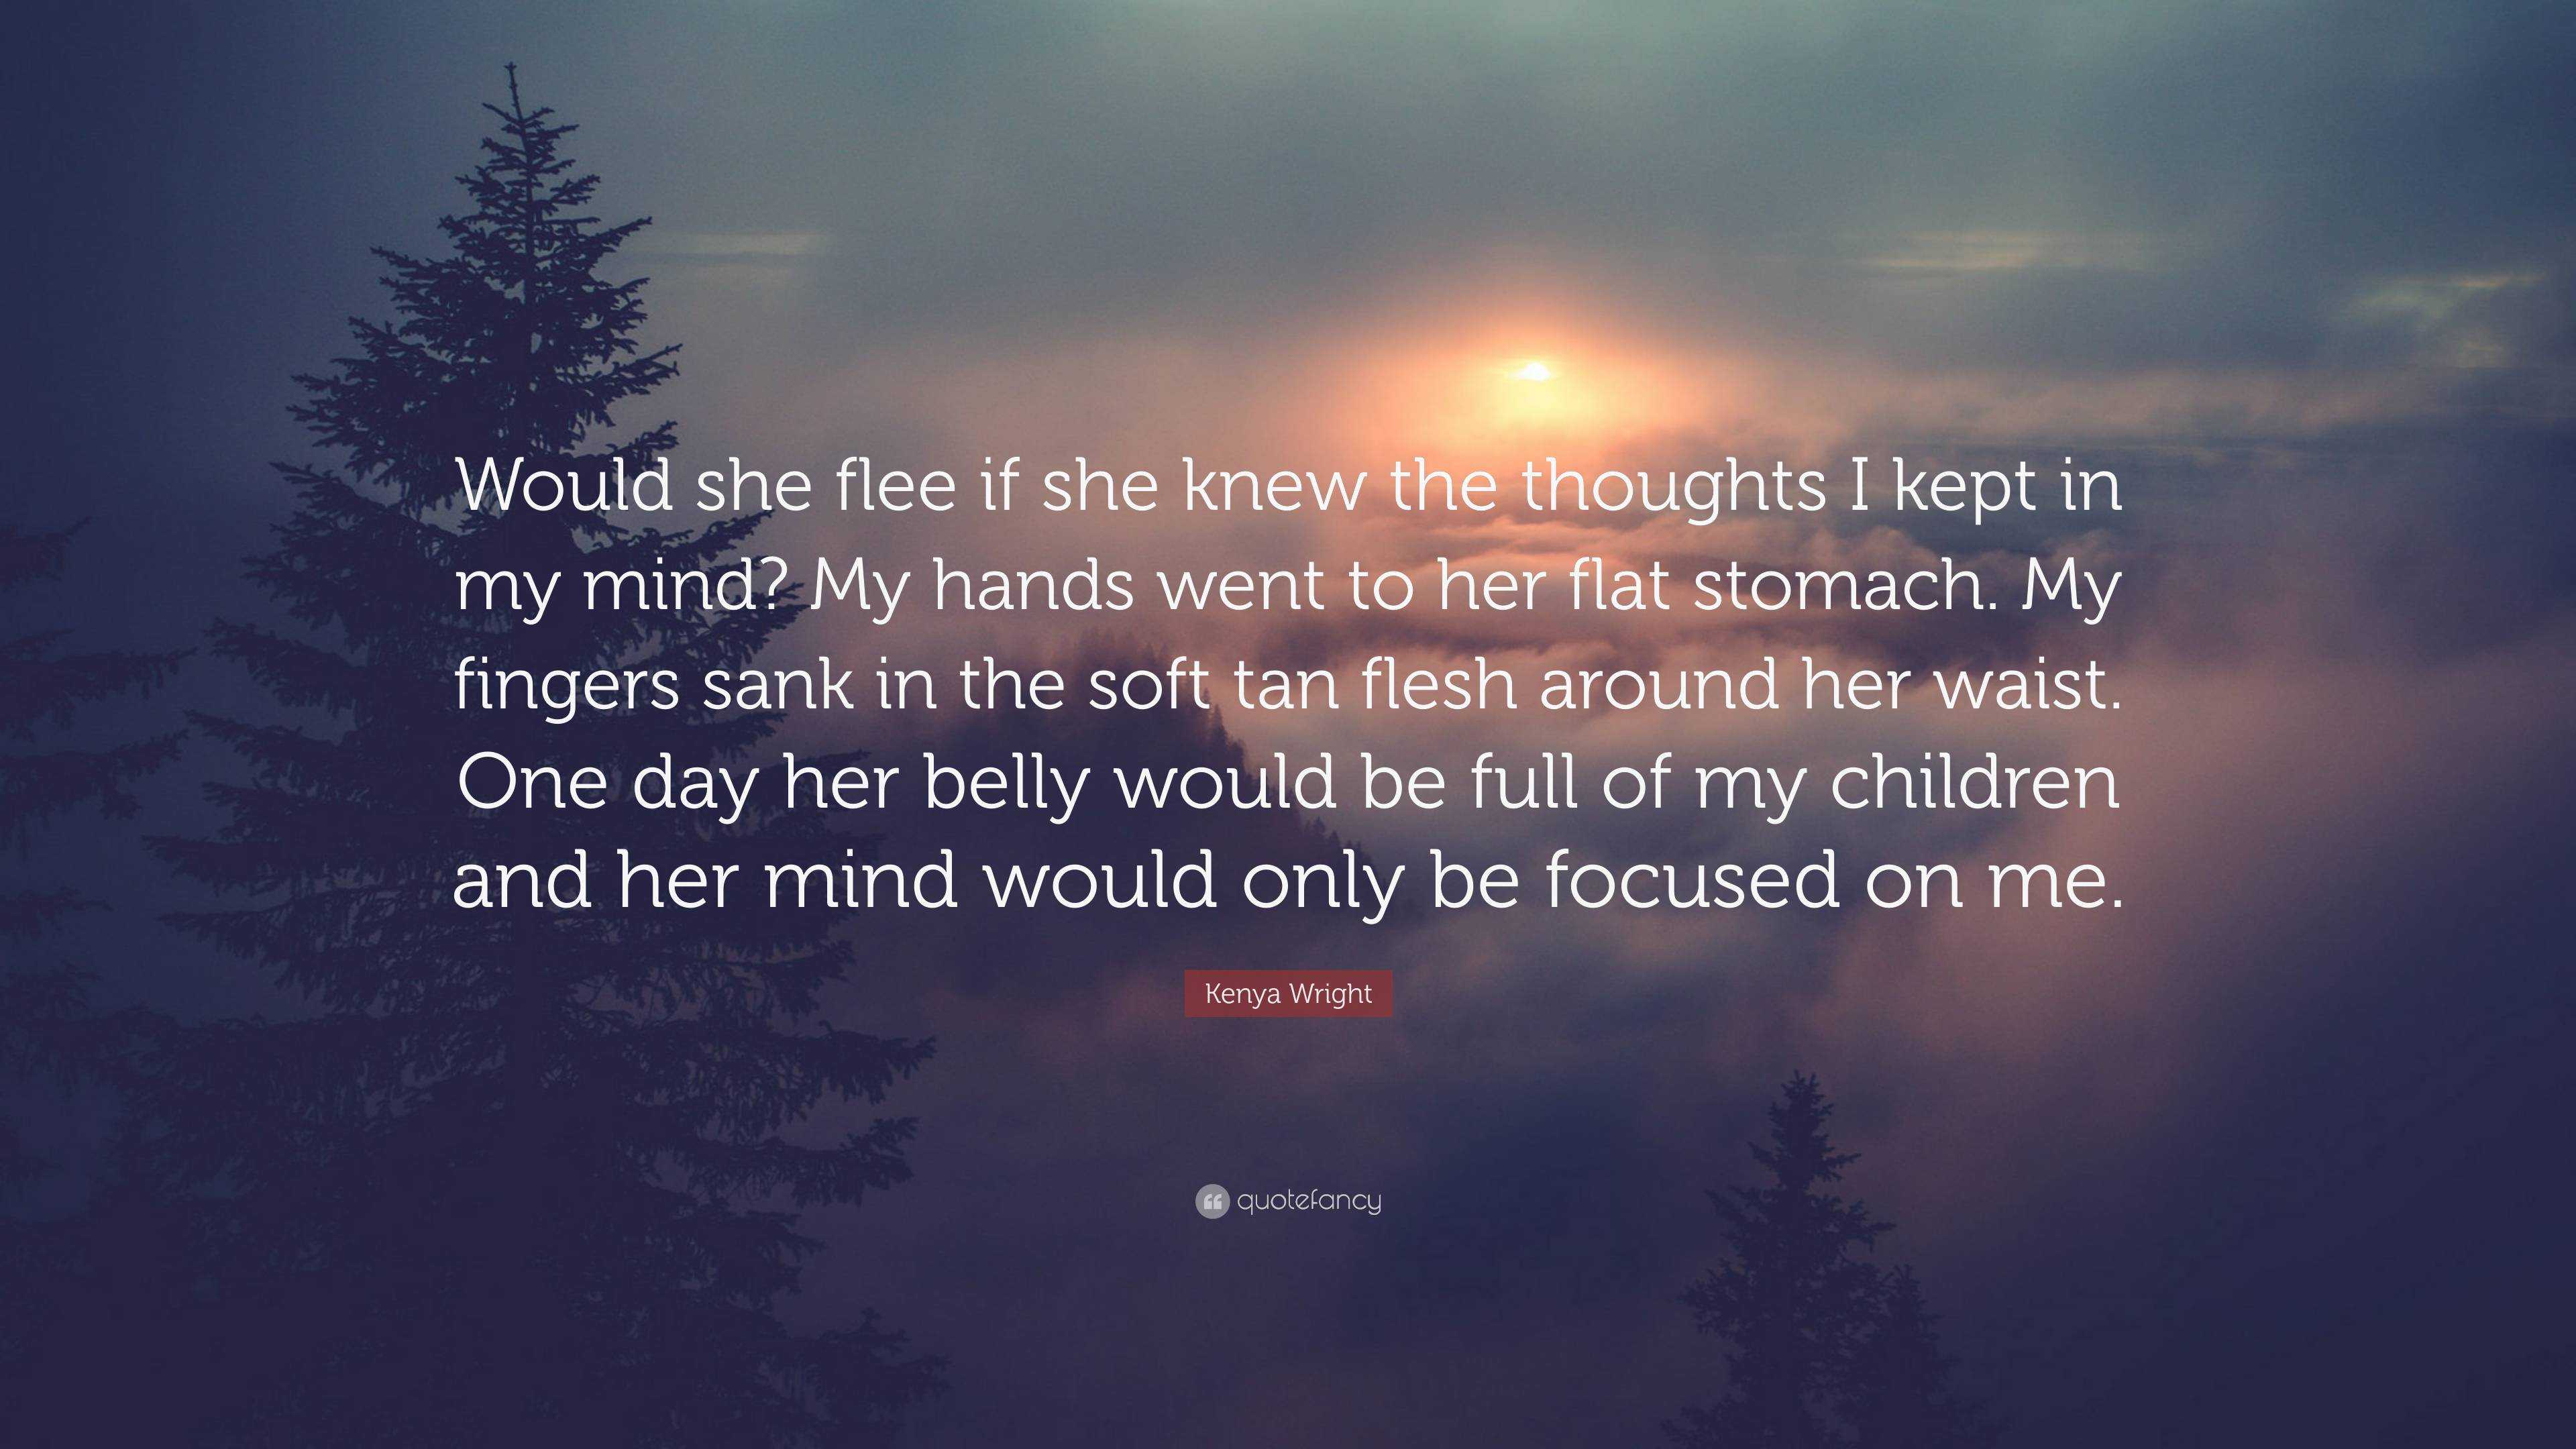 Kenya Wright Quote: “Would she flee if she knew the thoughts I kept in ...